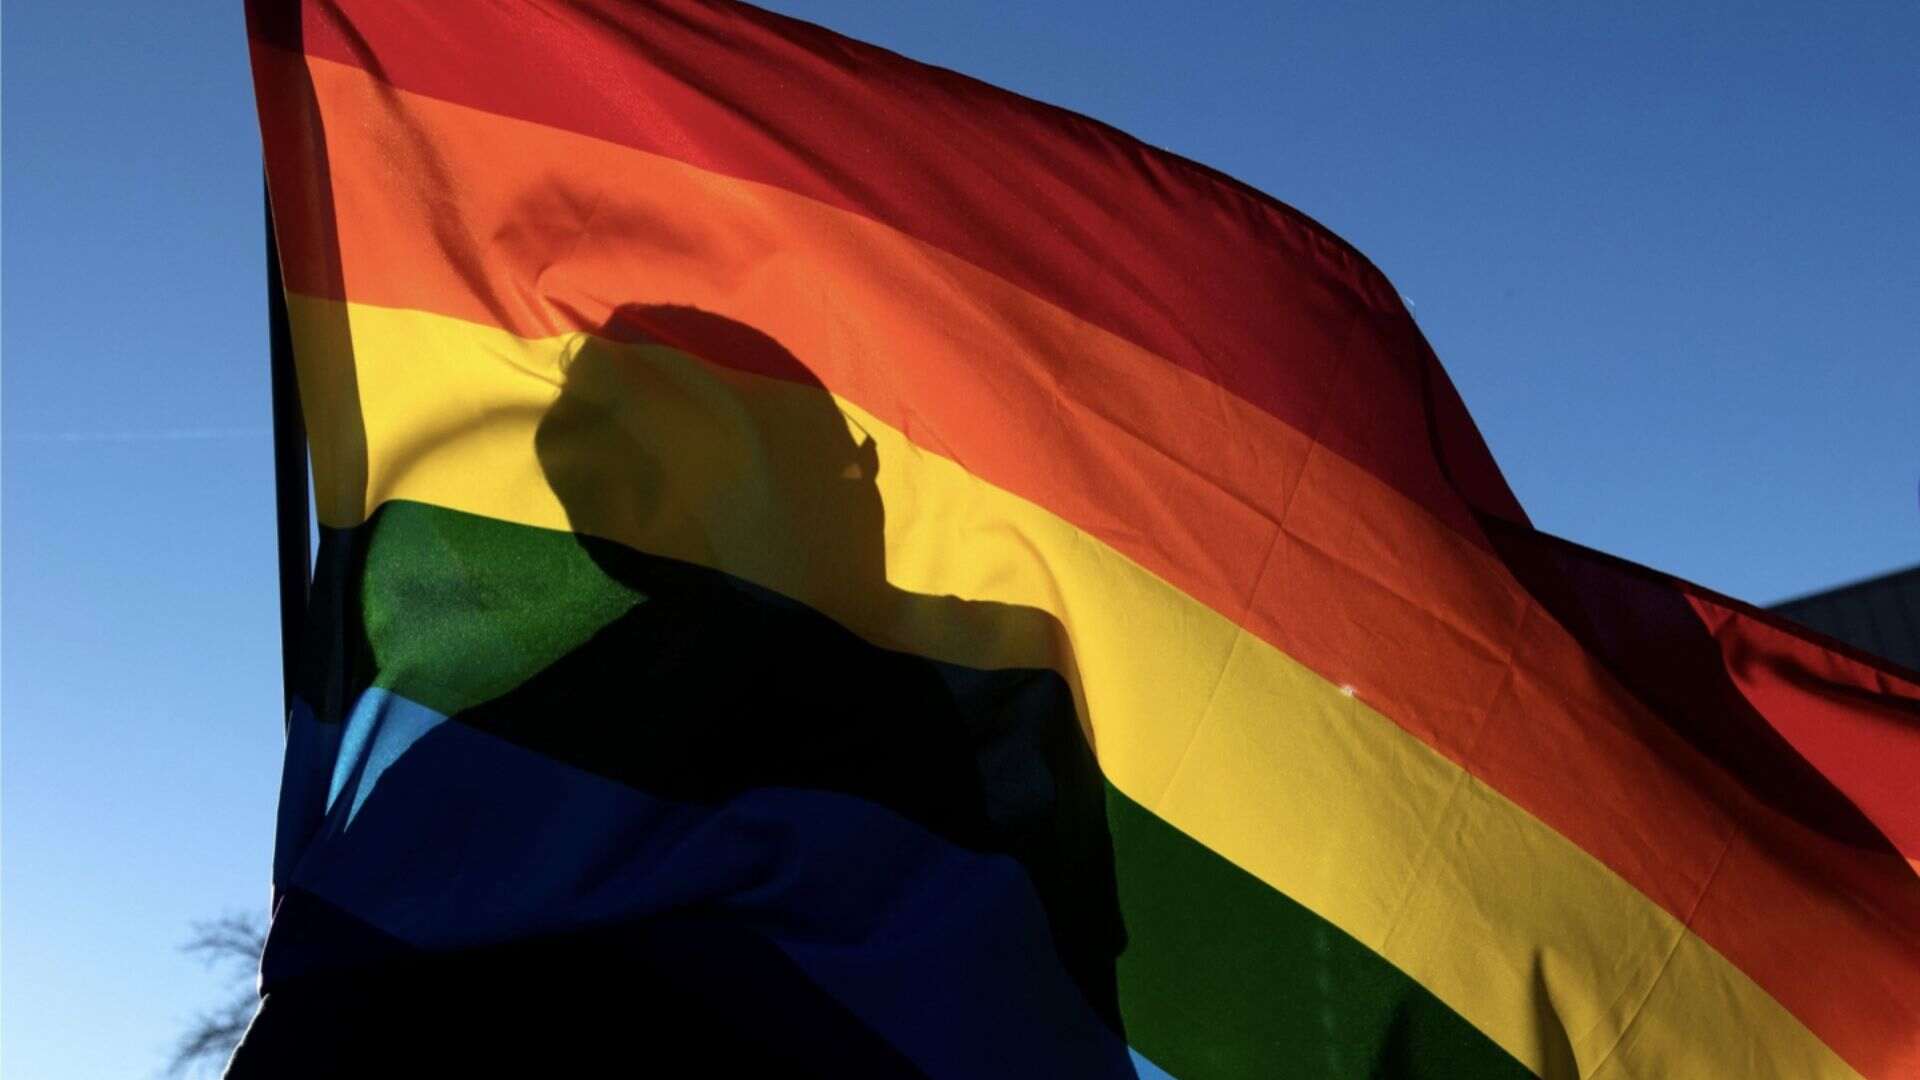 The Iraqi parliament has passed a controversial law that has sparked widespread condemnation for its harsh penalties against gay and transgender individuals